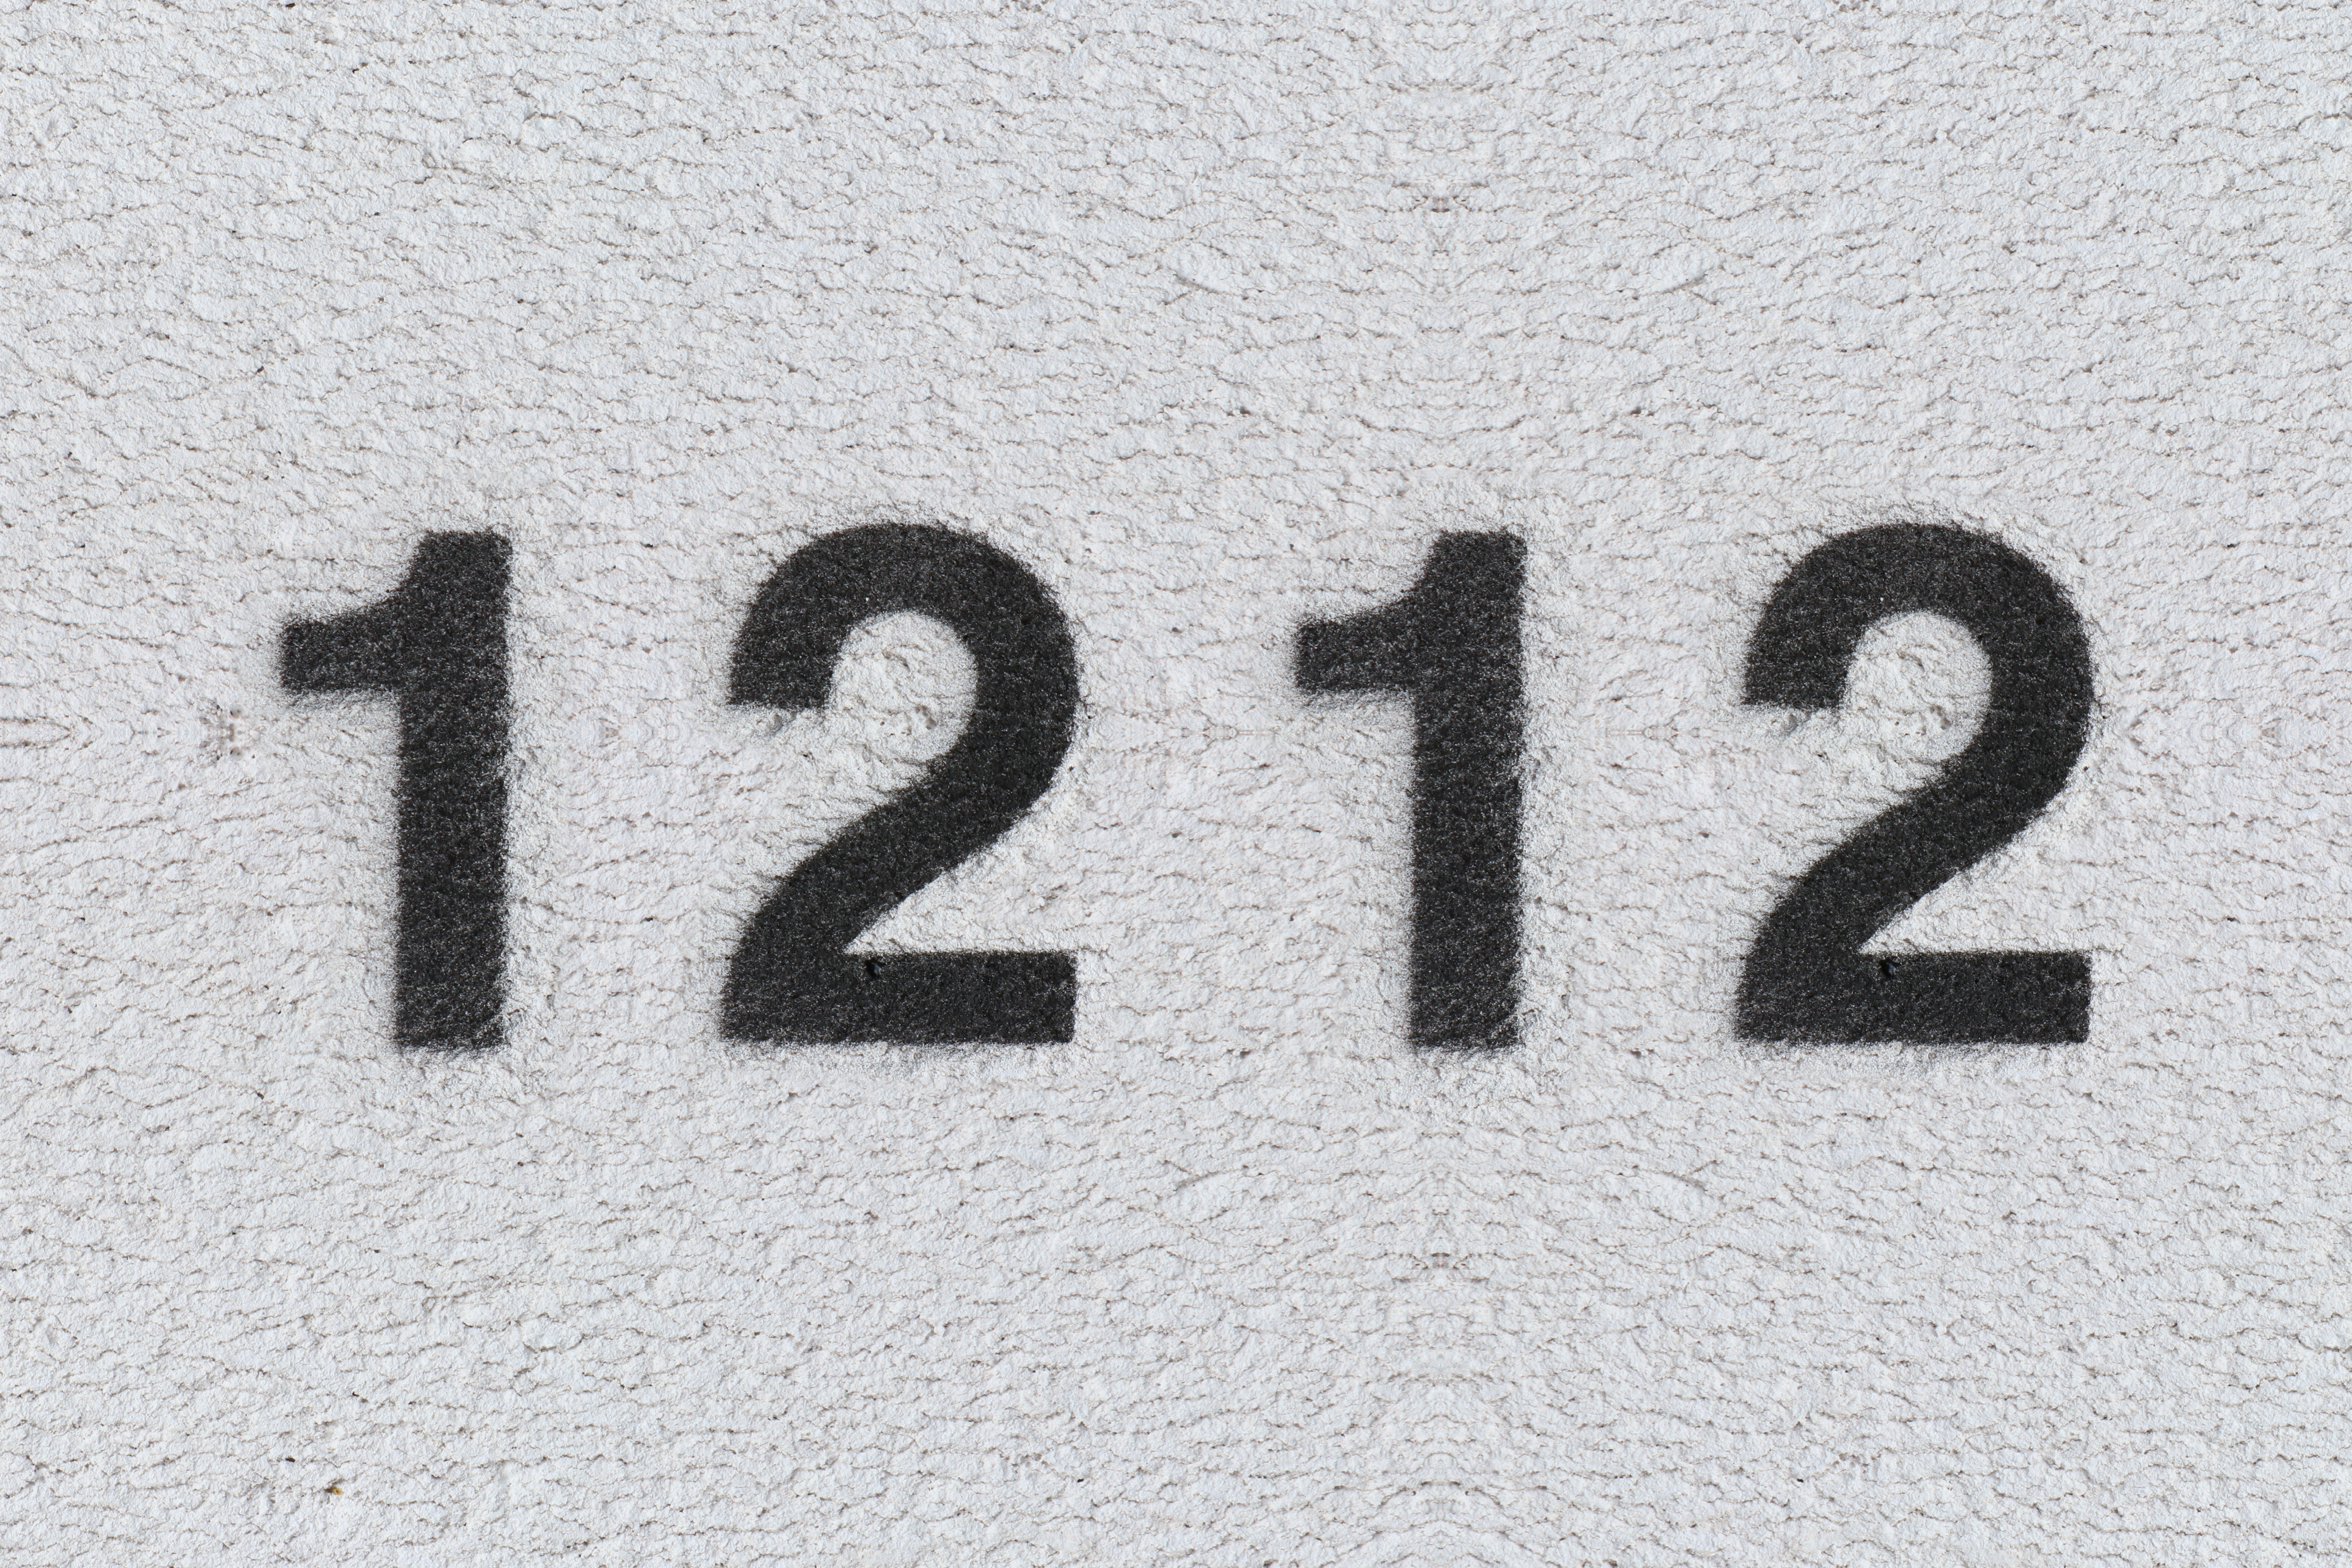 1212 written in black on a white background